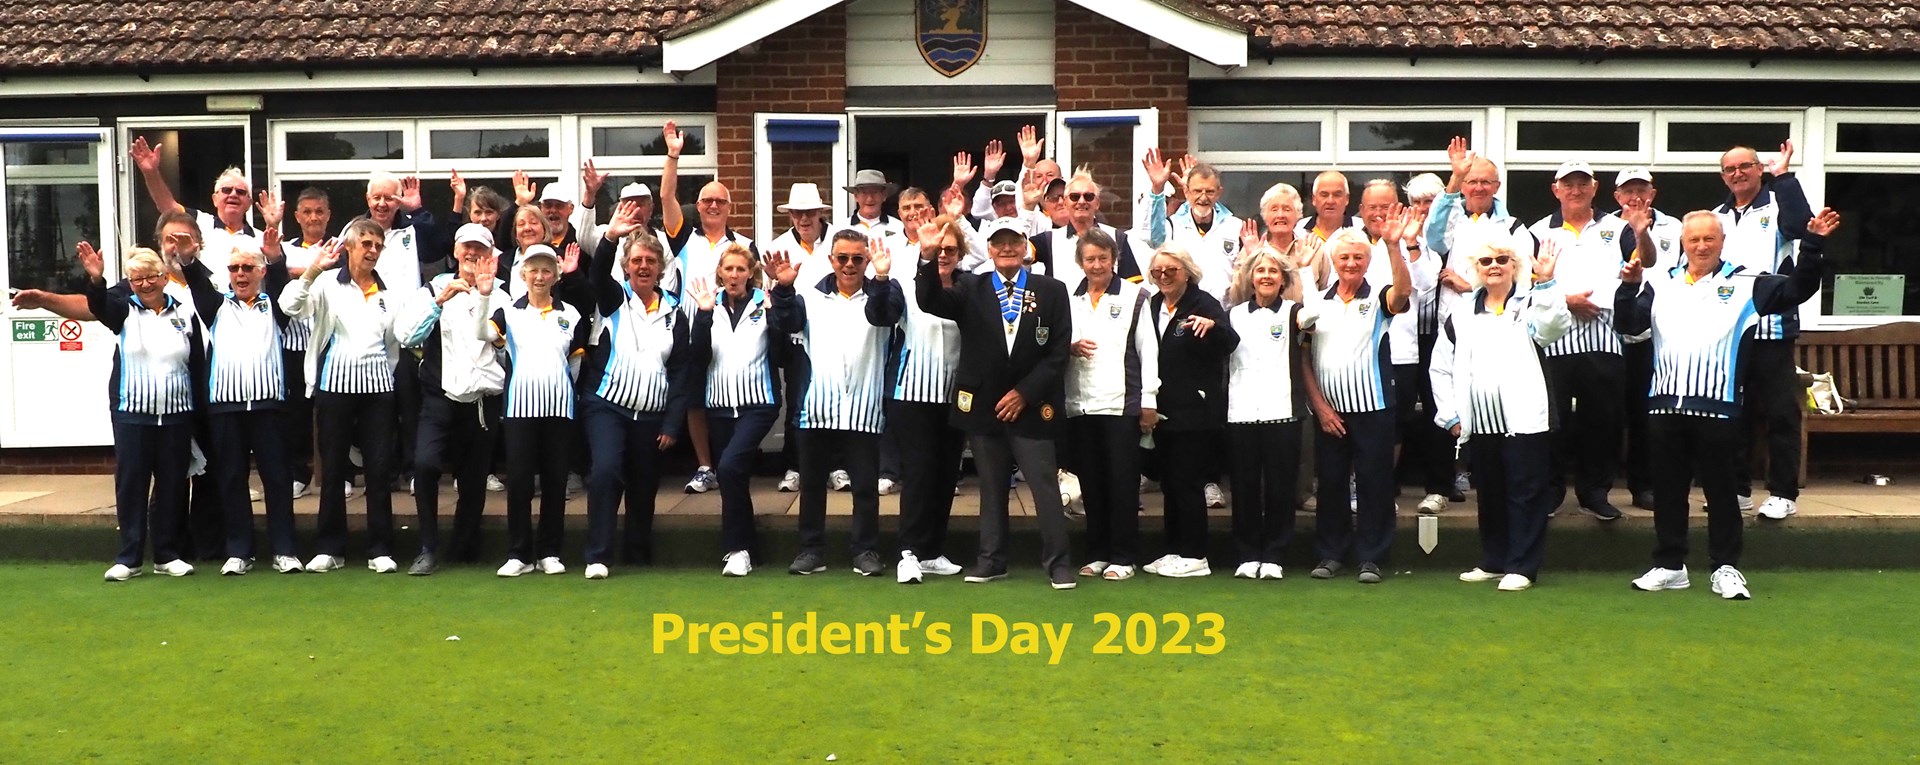 We all enjoyed President Bob's special day